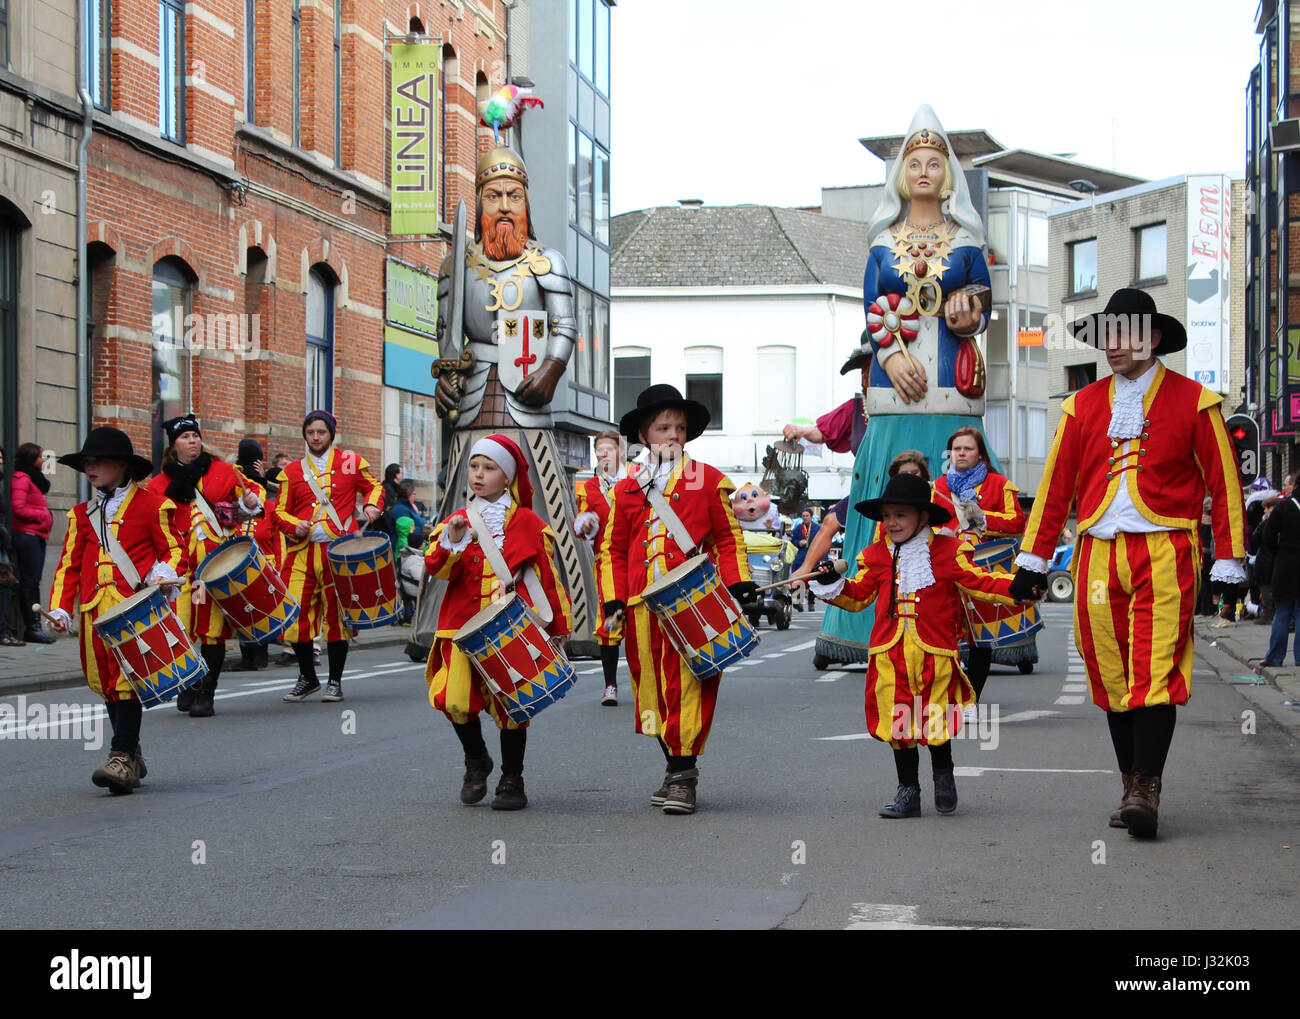 Parade Giants Belgium High Resolution Stock Photography and Images - Alamy